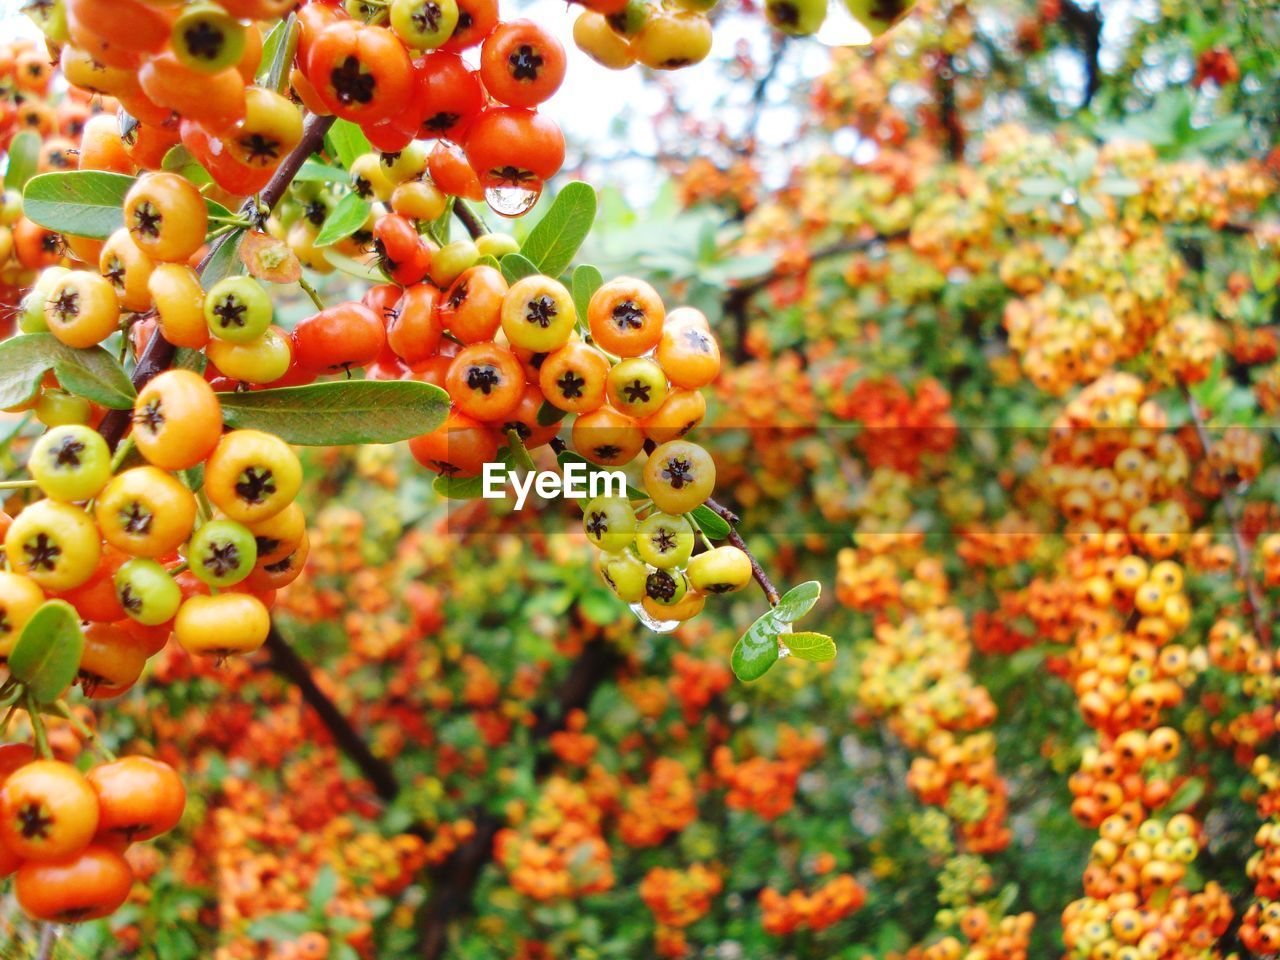 CLOSE-UP OF BERRIES ON TREE